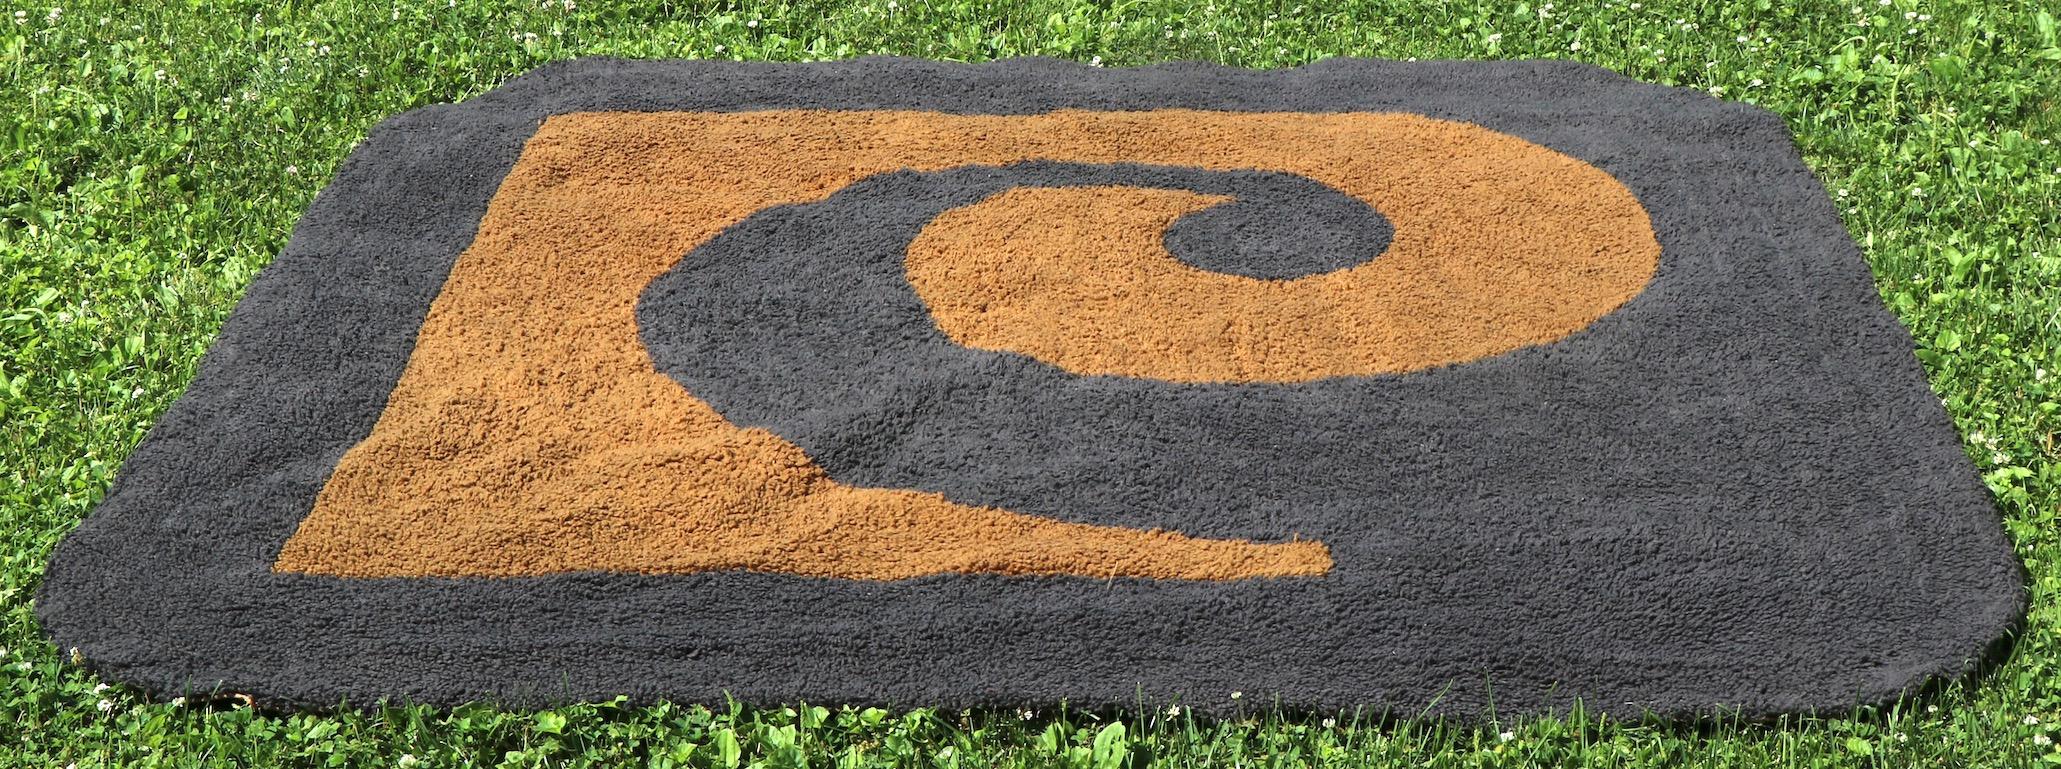 Chic, stylish and sophisticated area rug having the iconic Cardin PC logo in grey on warm tan brown ground. Vintage 1970s-1980s period, in good original condition. We have seen several Pierre Cardin rugs and carpets, but this is the first one we